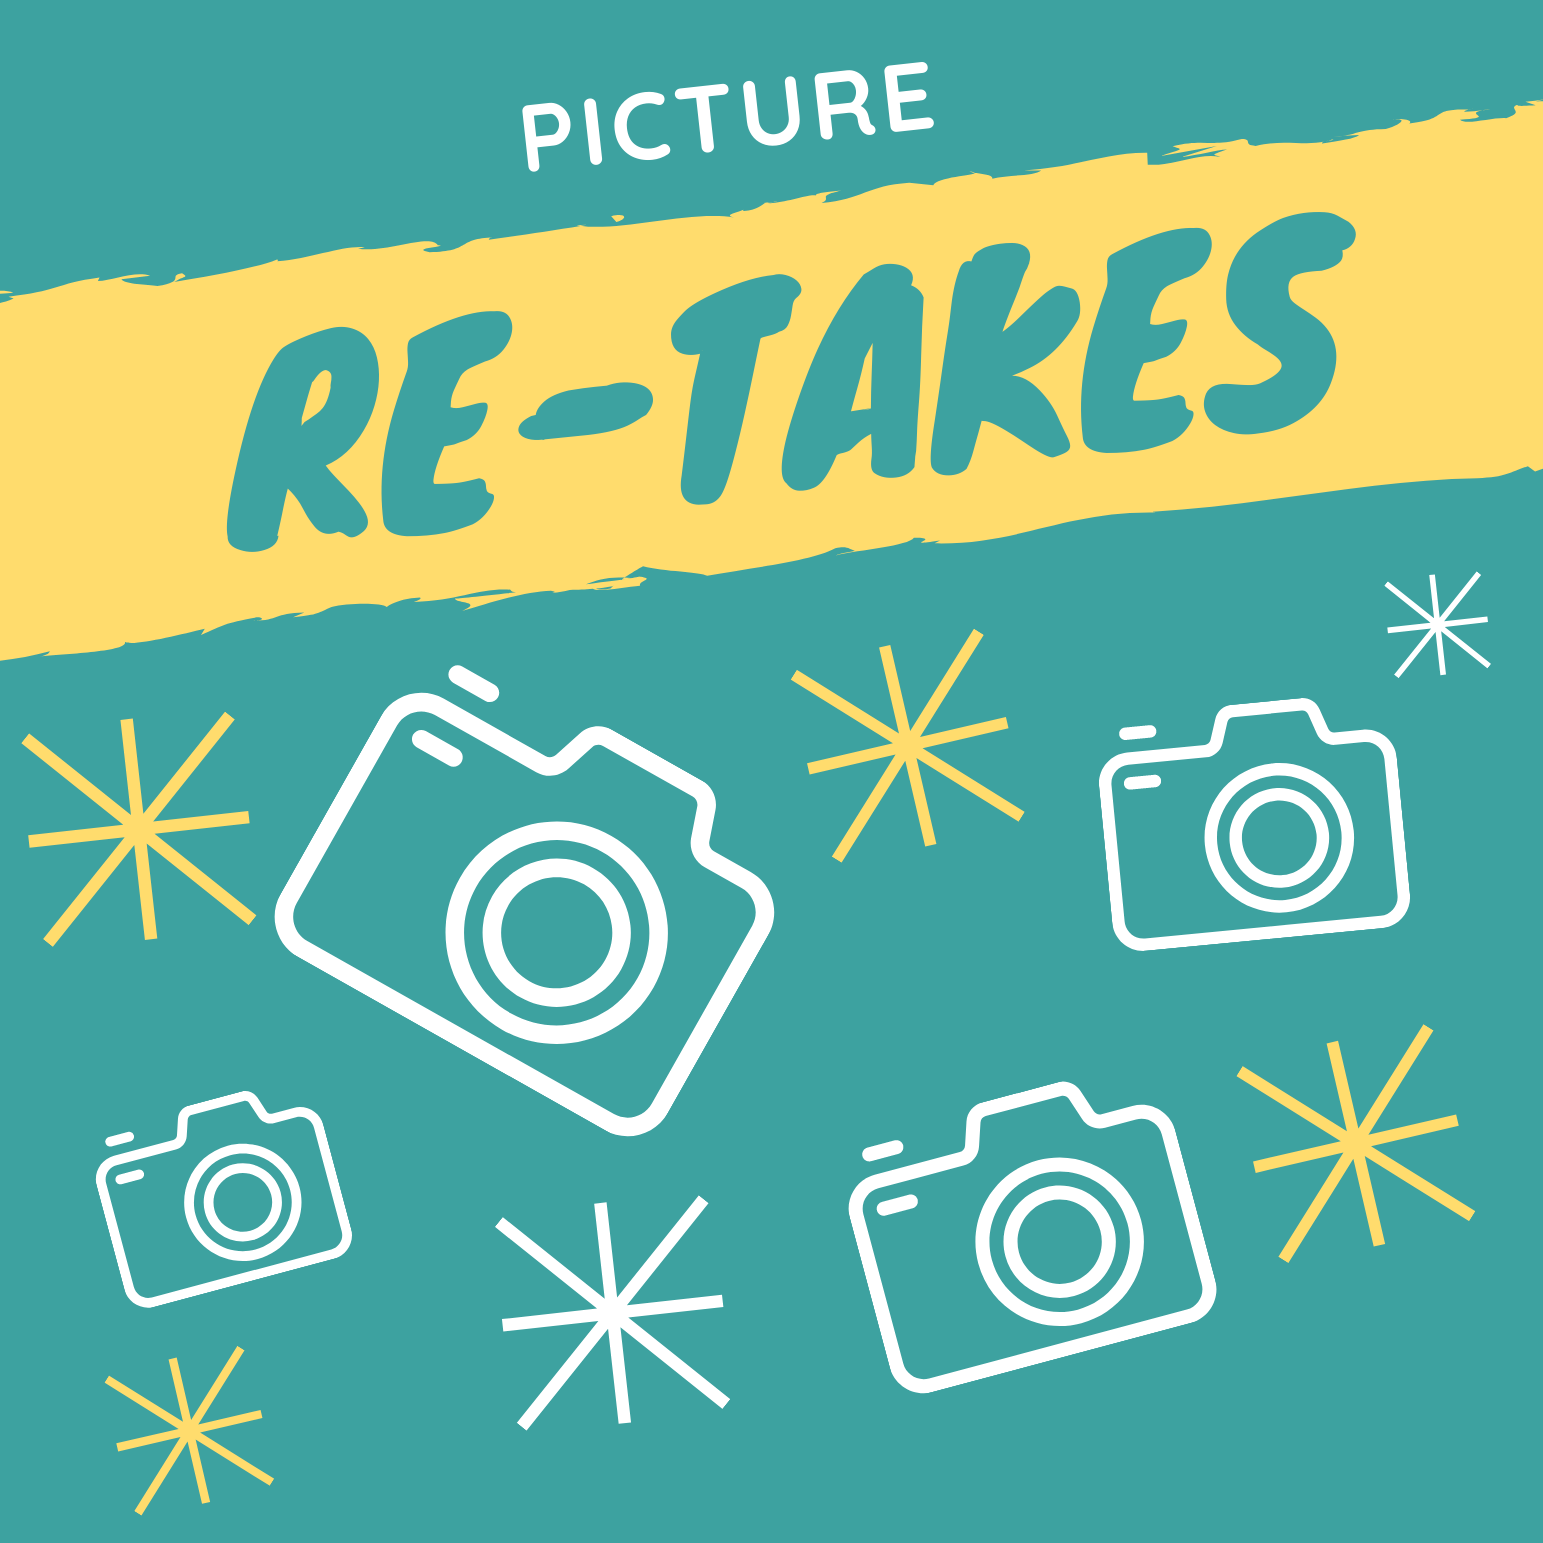 Picture re-takes flyer